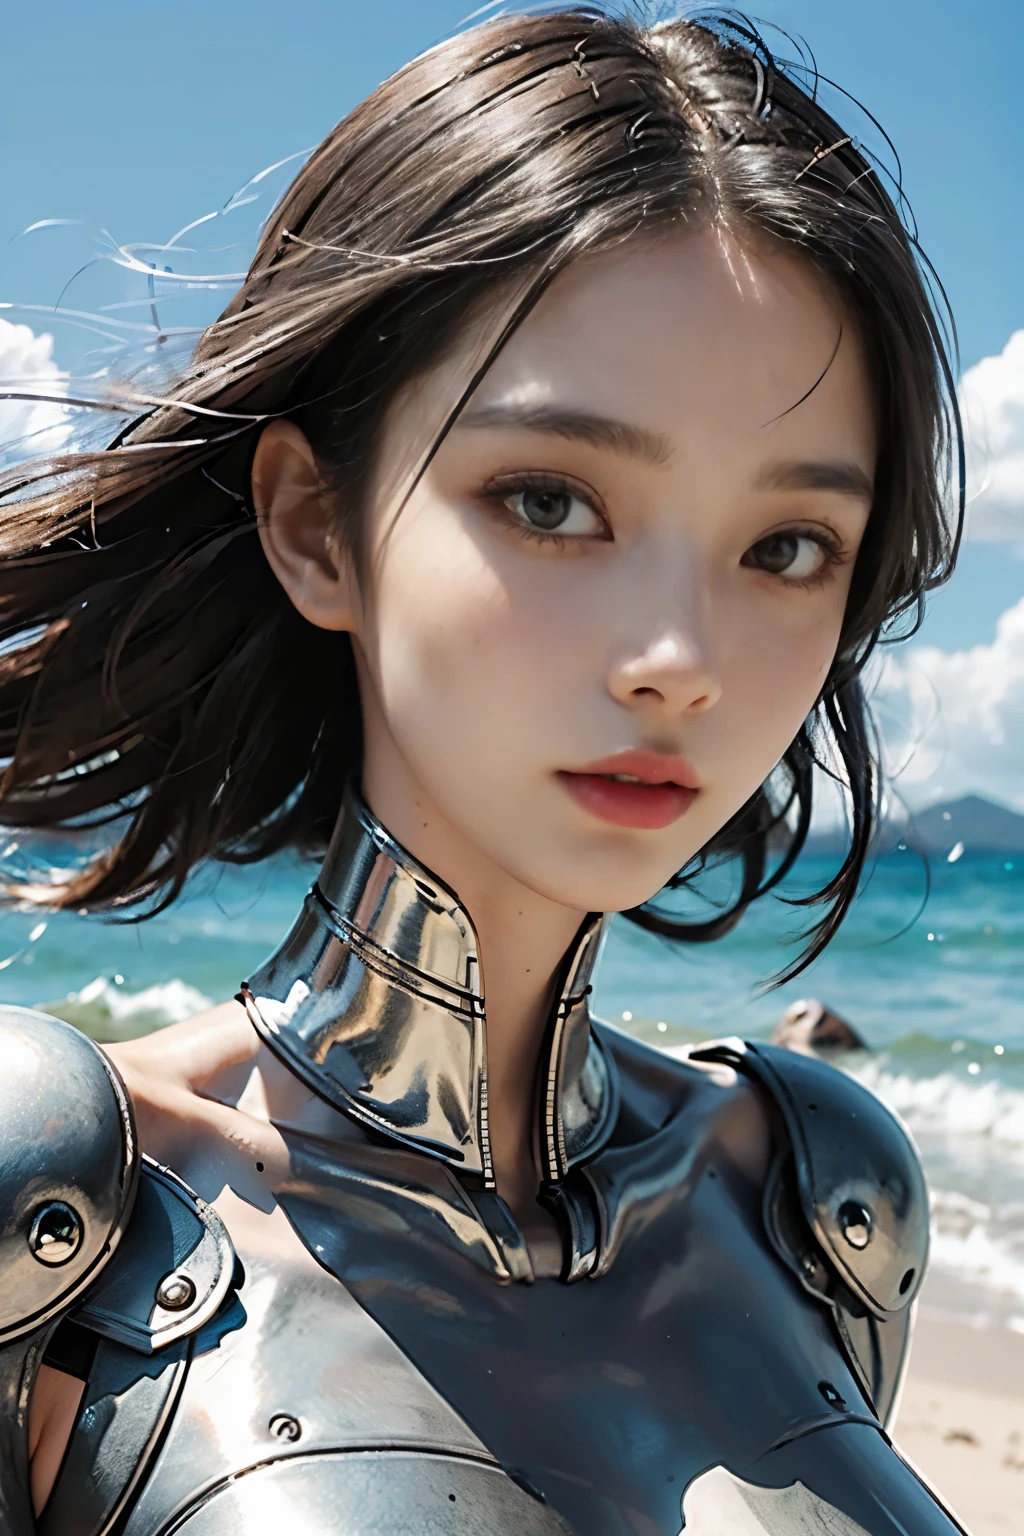 (close up:1.4), Best quality, delicate face, 18 years old girl, slim body, body made of metal, small bust, metal structural skeleton, seaside, standing posture, beach, (((there are huge UFOs floating in the air))), cyberpunk, sci-fi